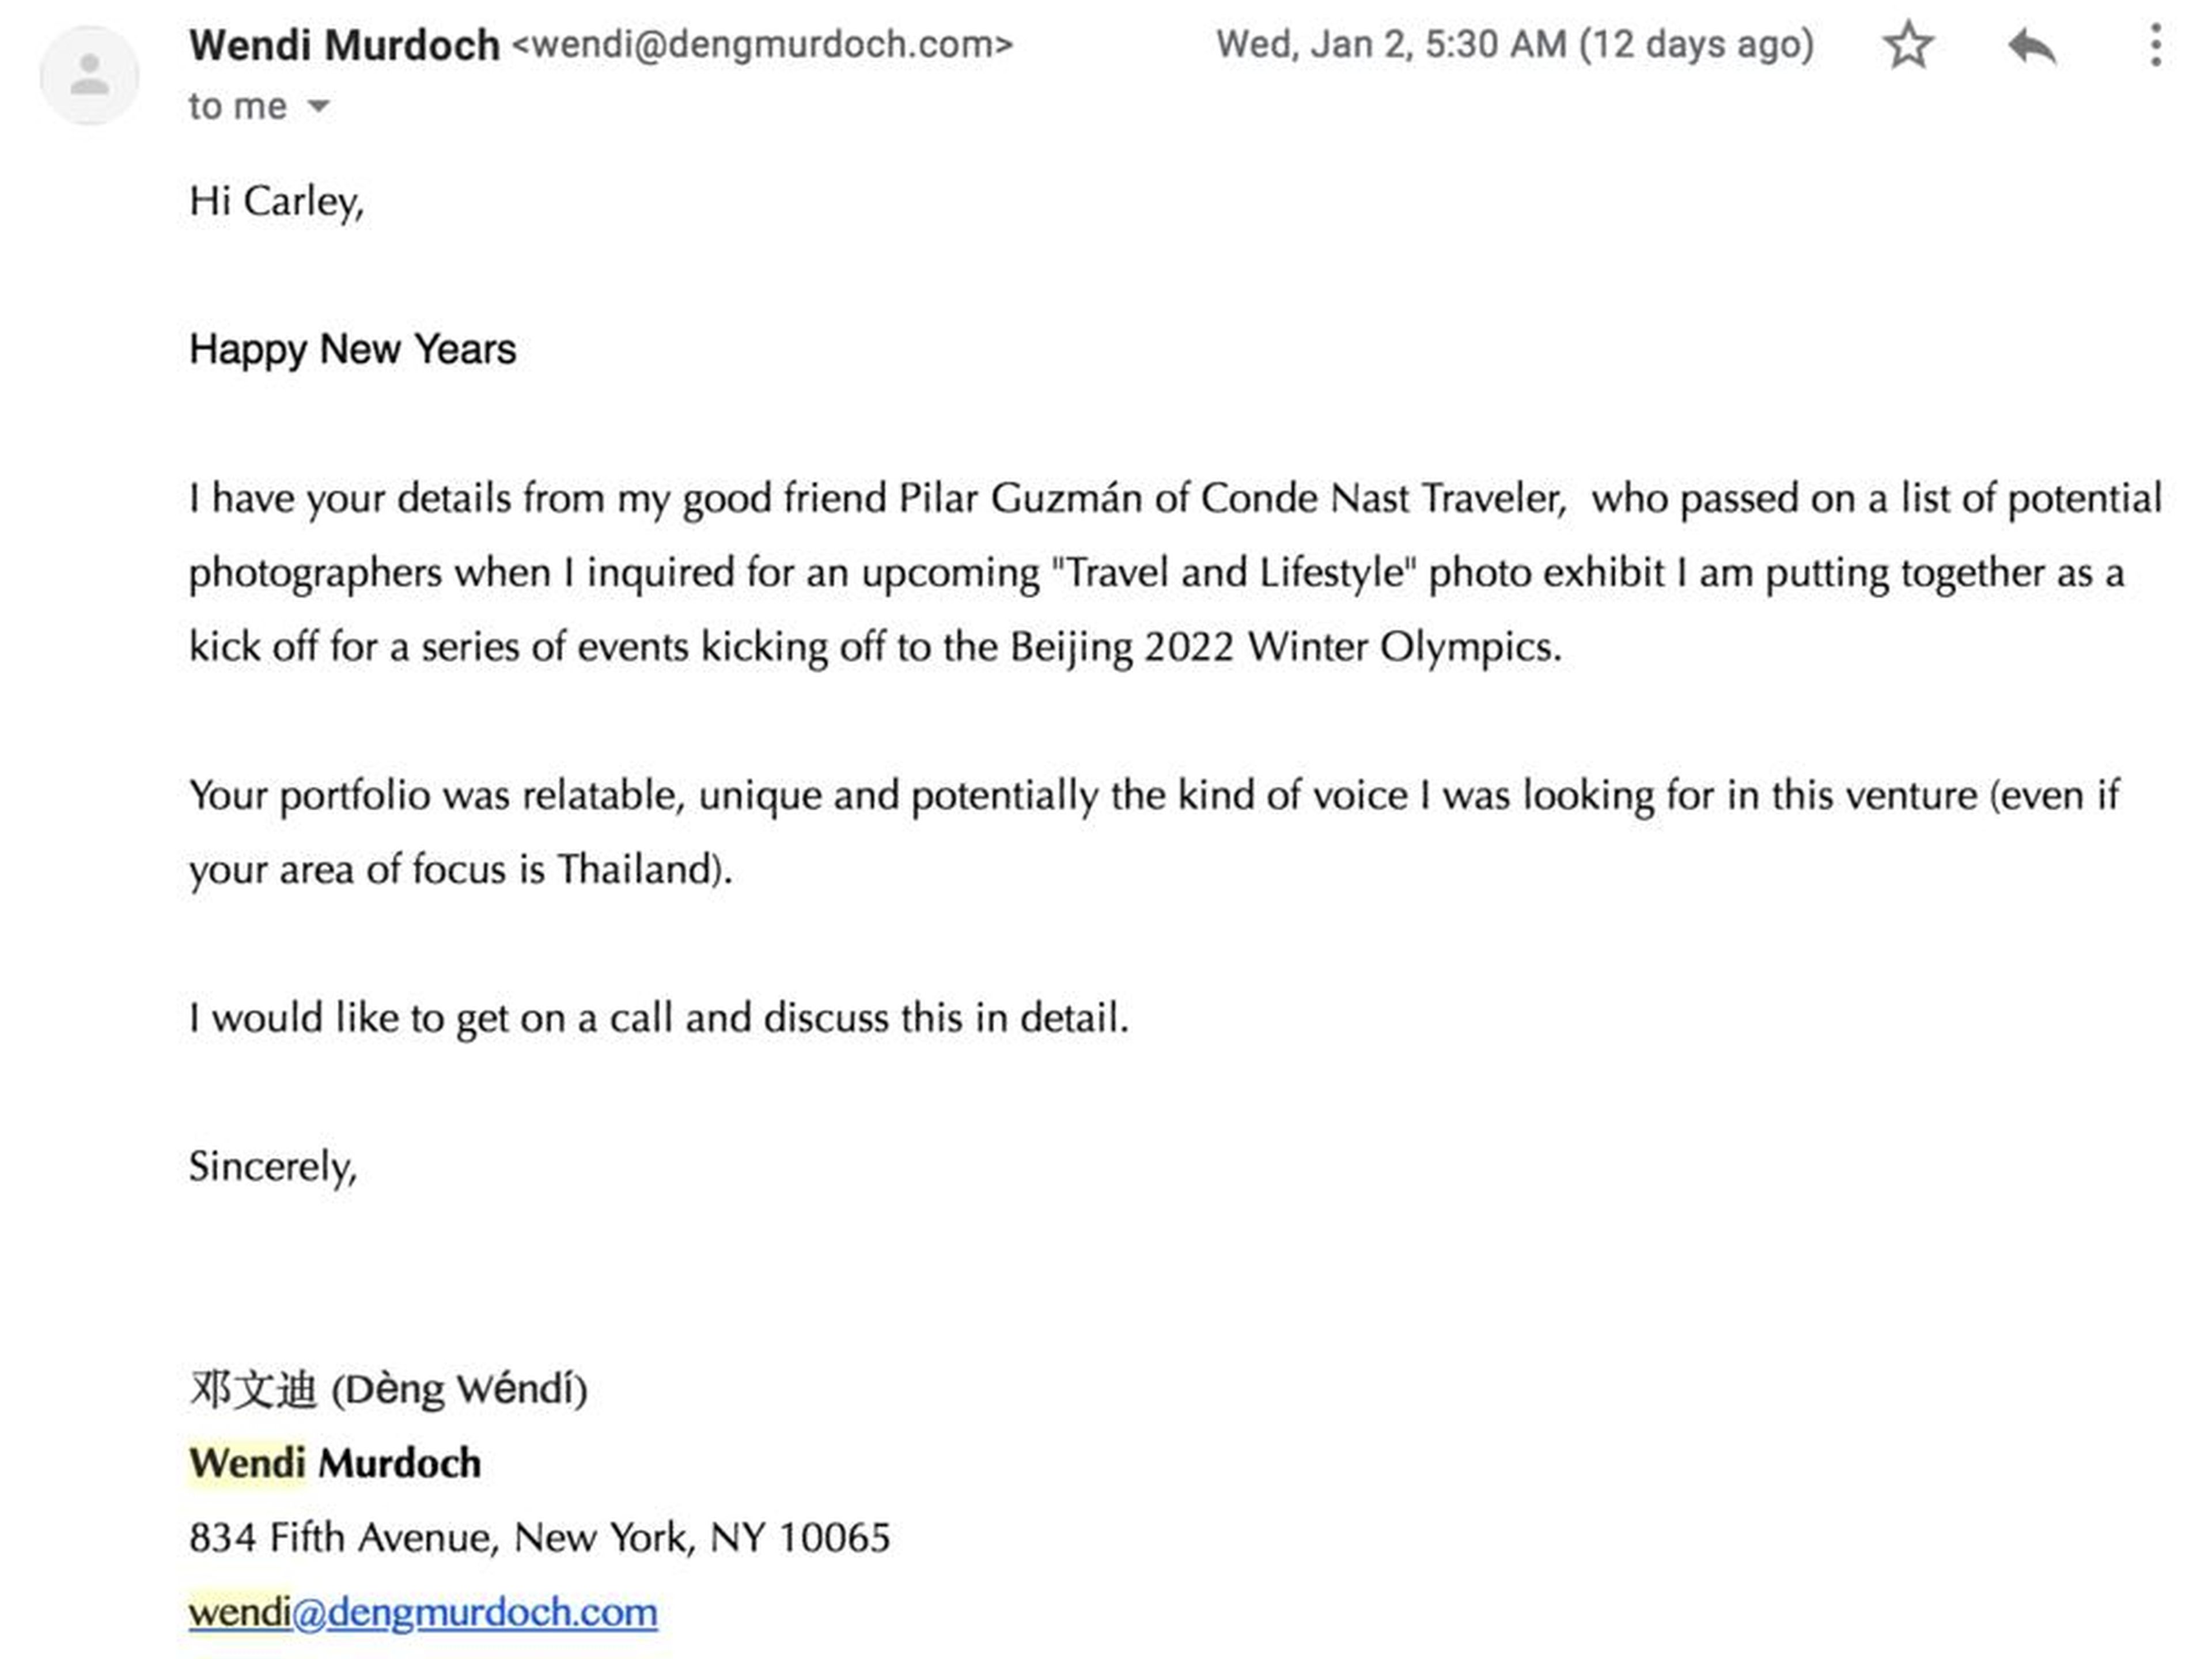 An email sent from the fake Wendi Deng Murdoch to Carley Rudd.